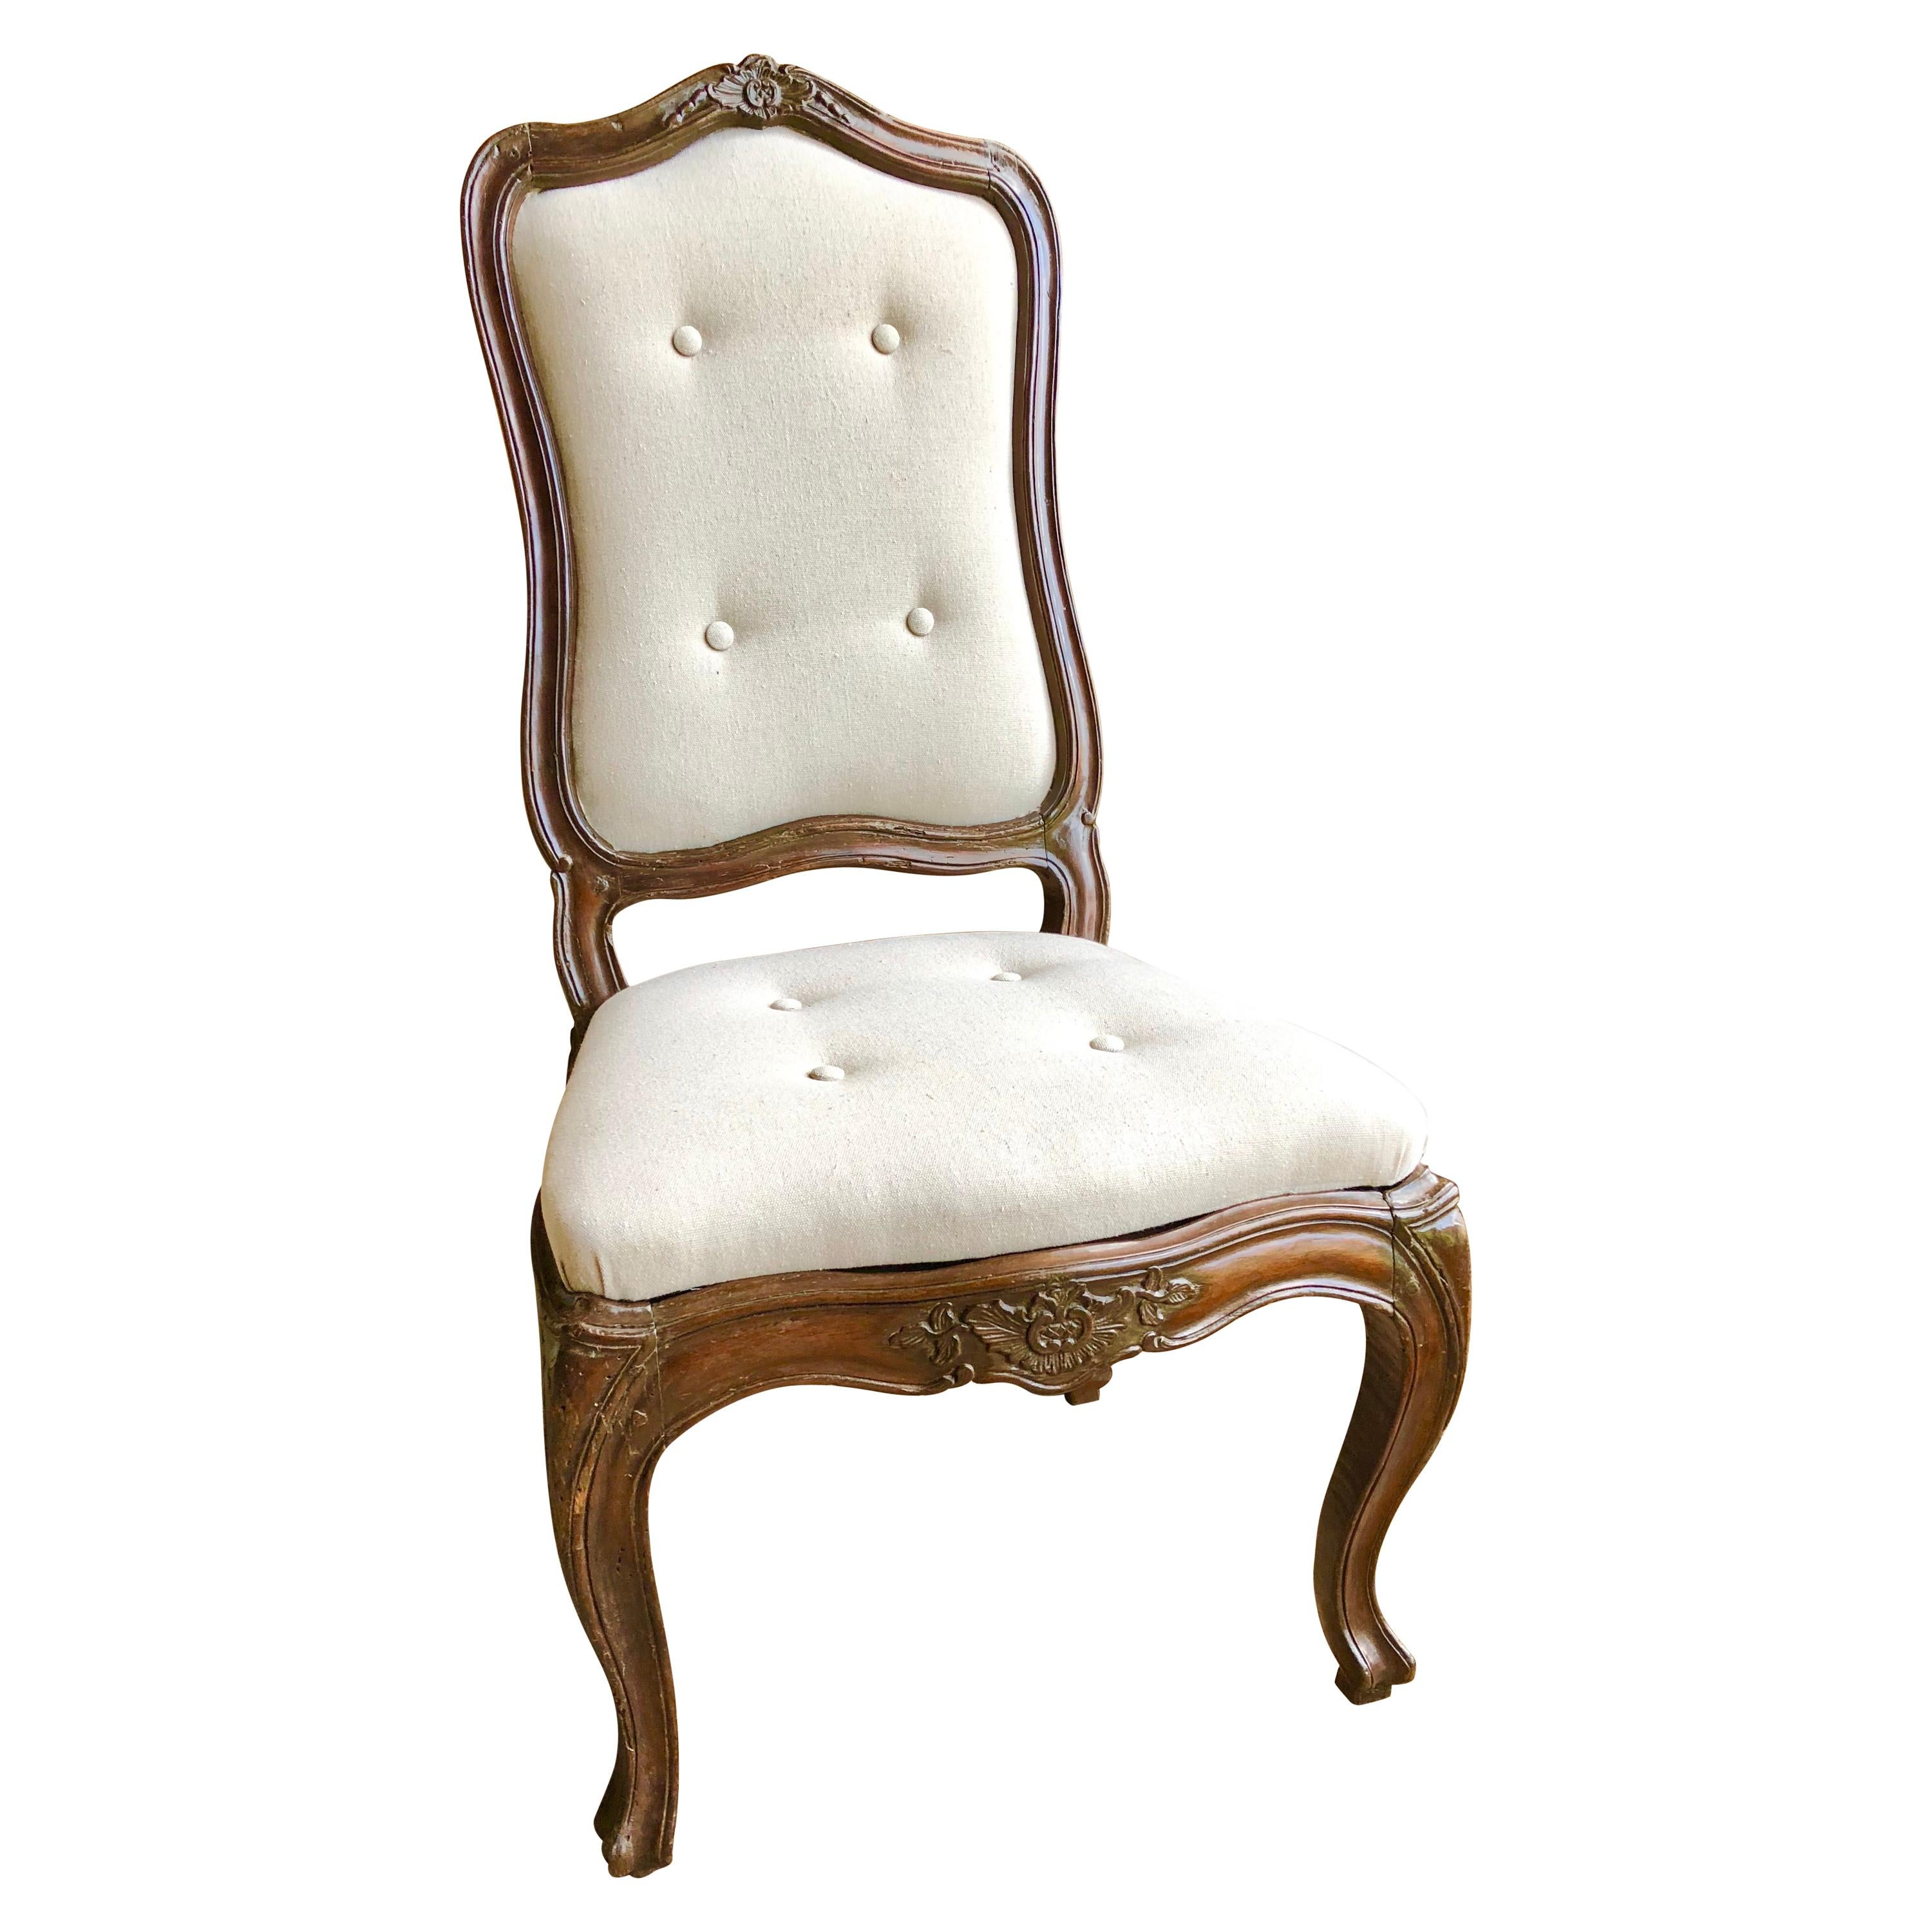 A nice set of 6 Italian dining chairs in walnut, early 19th century, in the Louis XV manner, with slip seats and backs, newly upholstered in wheat-colored cotton duck with buttons. The frames have carvings on the seat rails and top crests and are